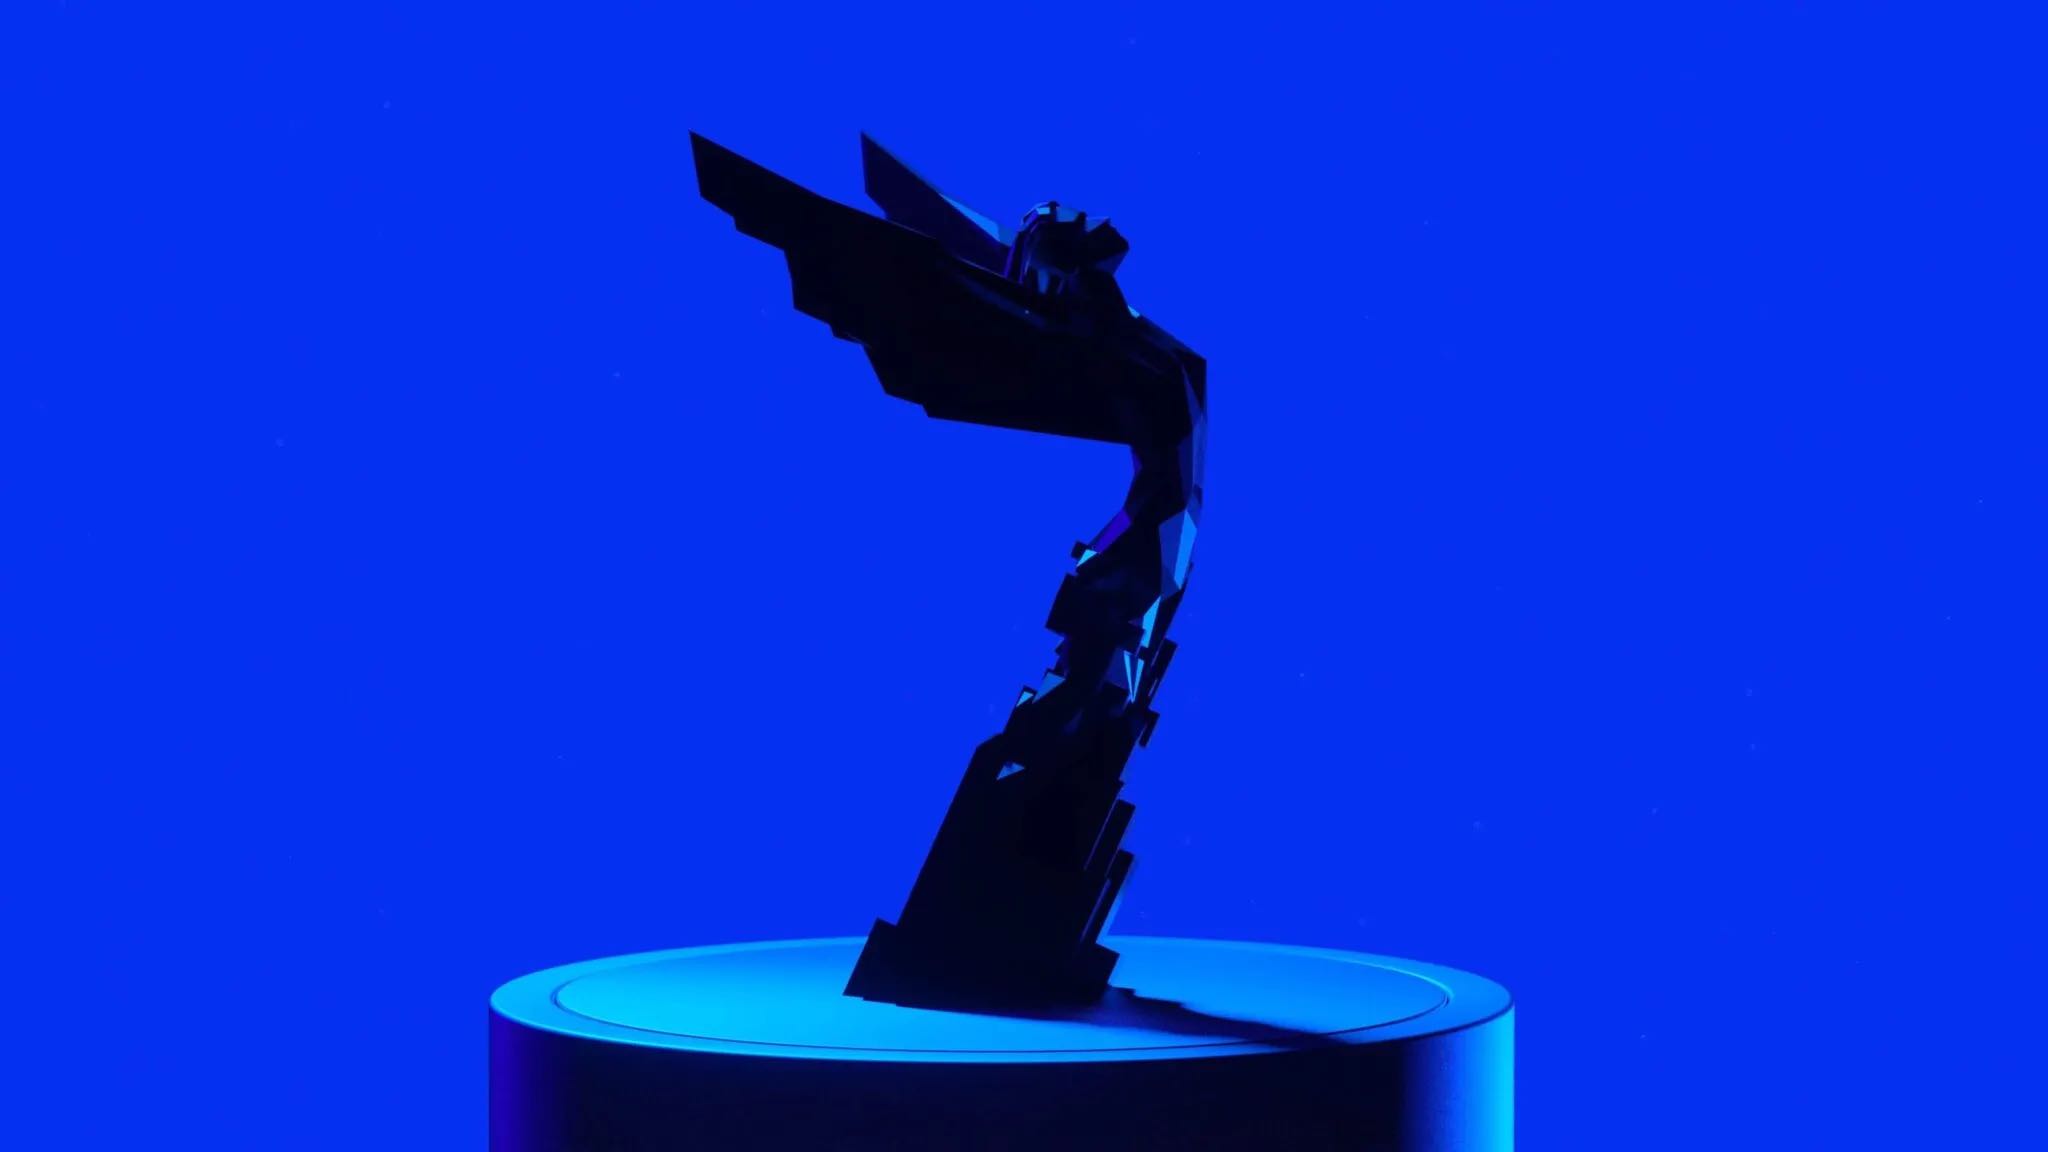 This year's The Game Awards will feature more than just video games